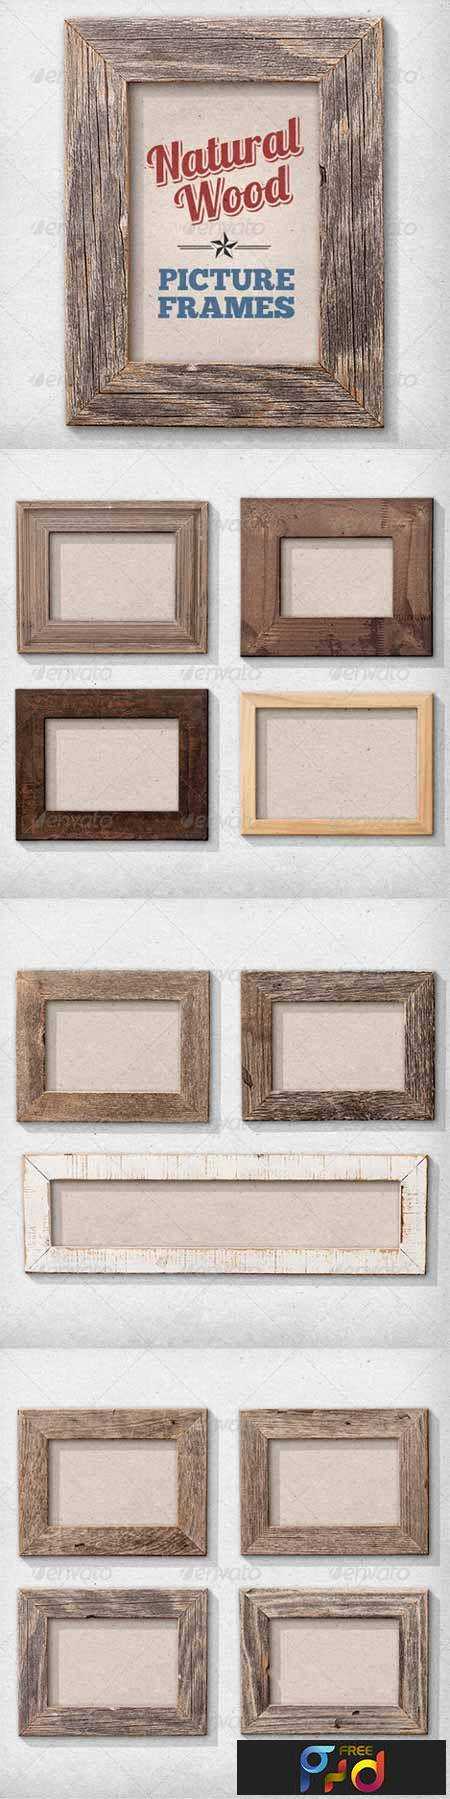 freepsdvn-com_1436896371_11-isolated-natural-wood-picture-frames-2686798